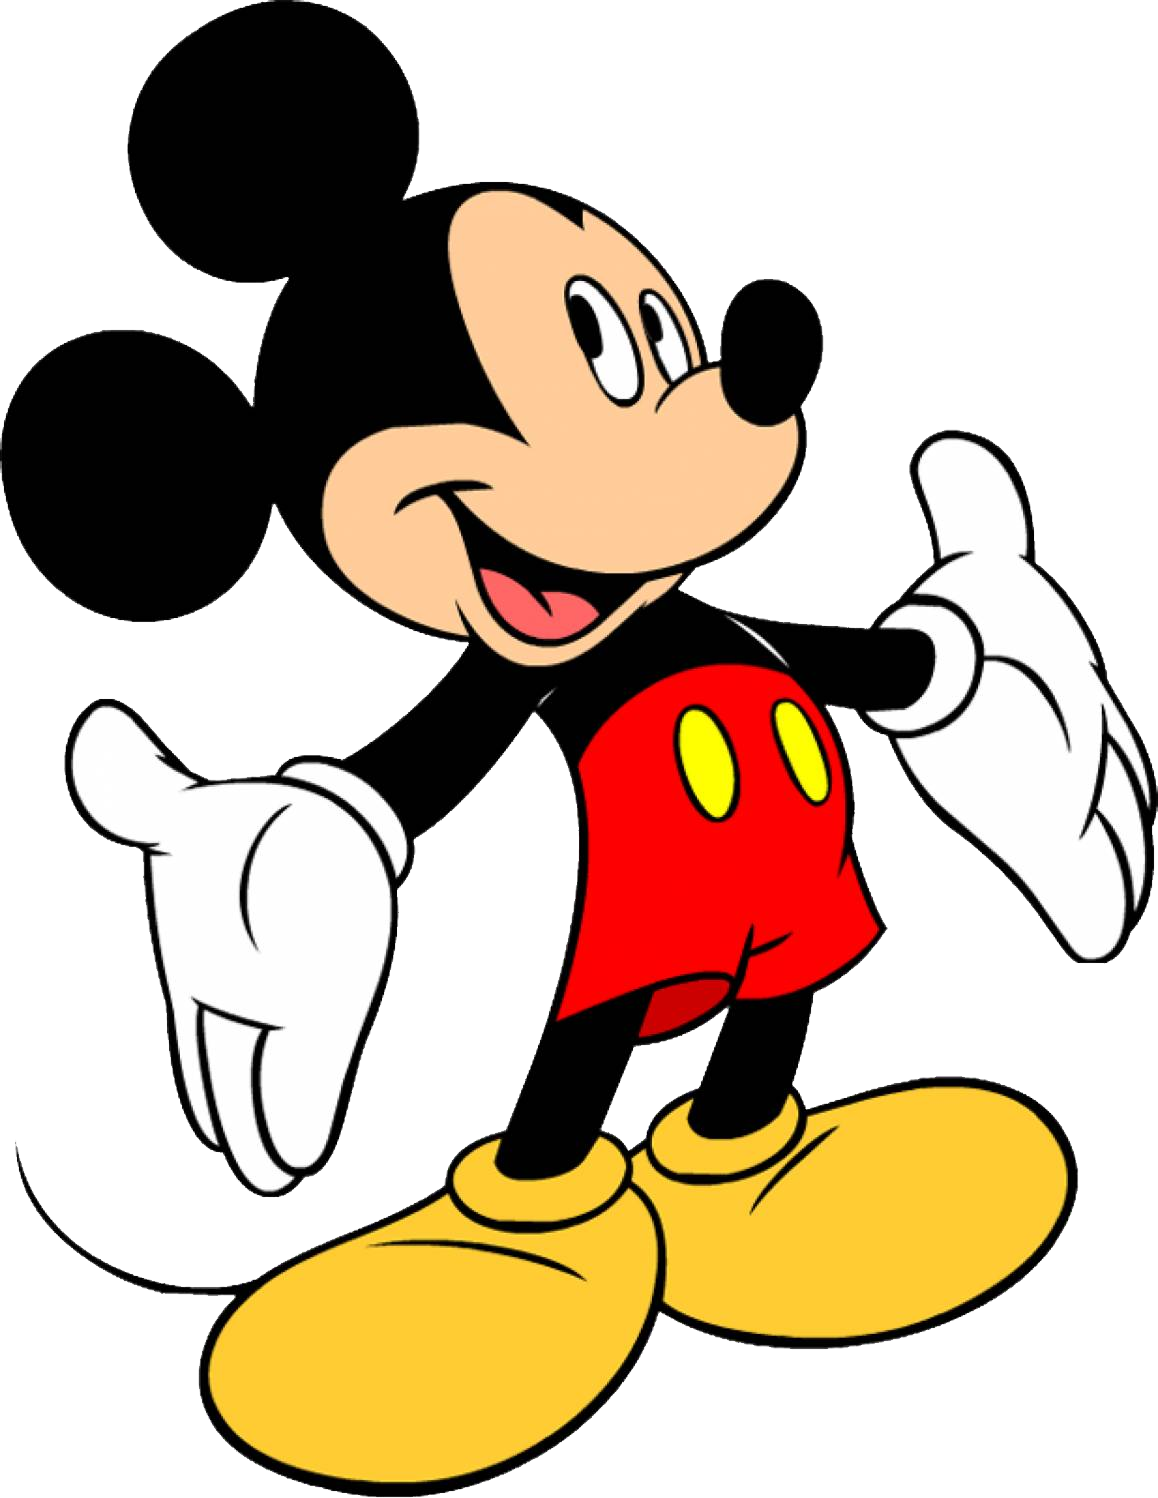 Incredible Compilation of Over 999 Top Mickey Mouse Cartoon Images, All ...